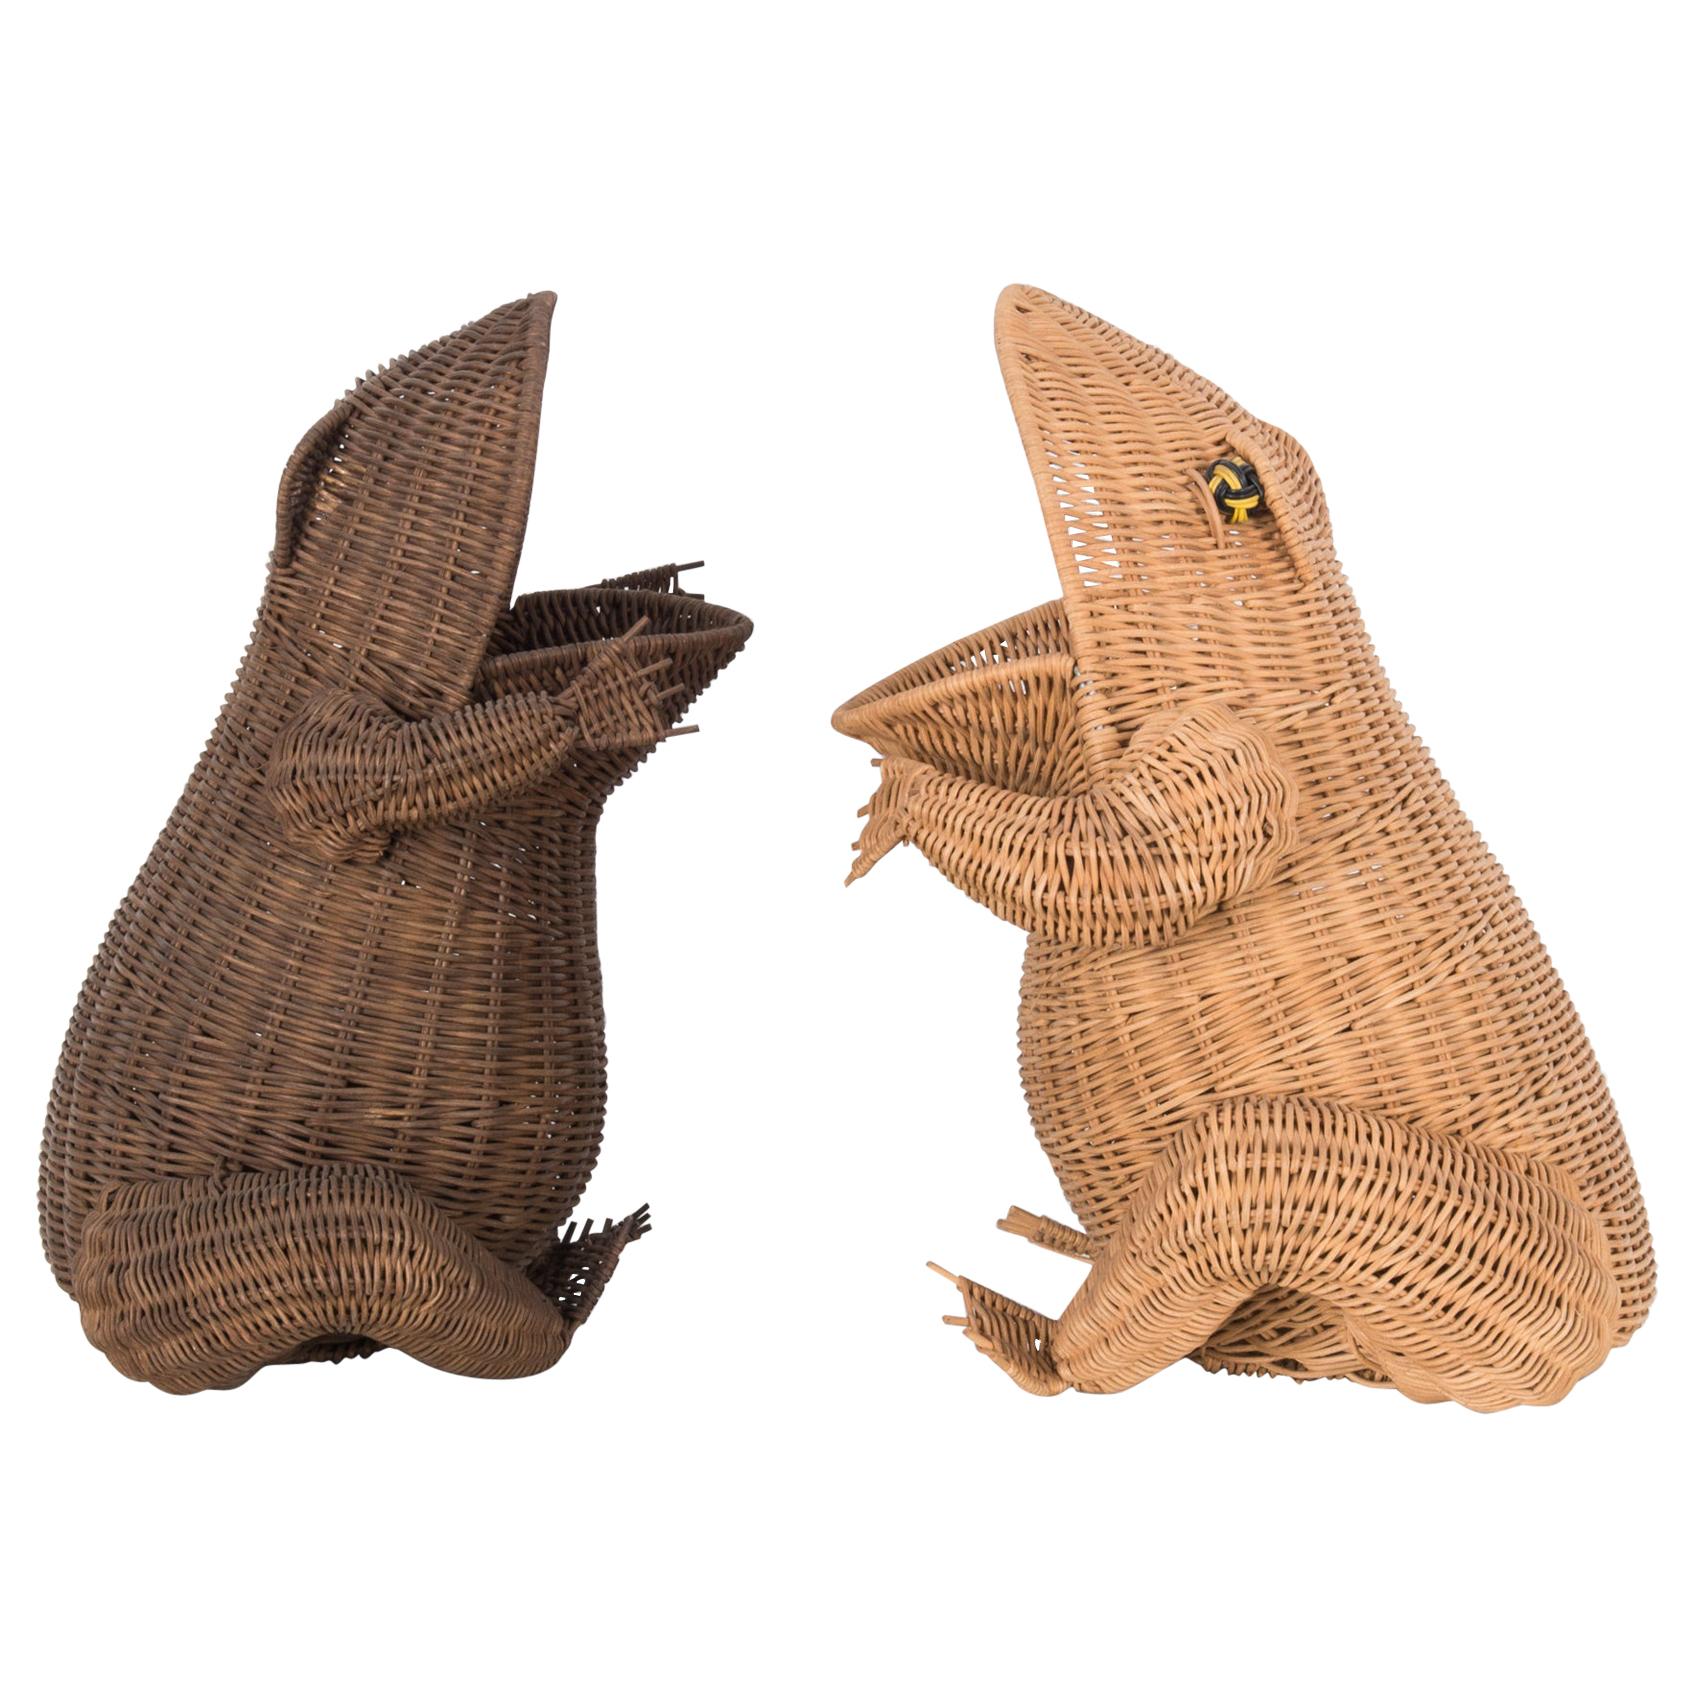 1960s French Wicker Frog Baskets, a Pair